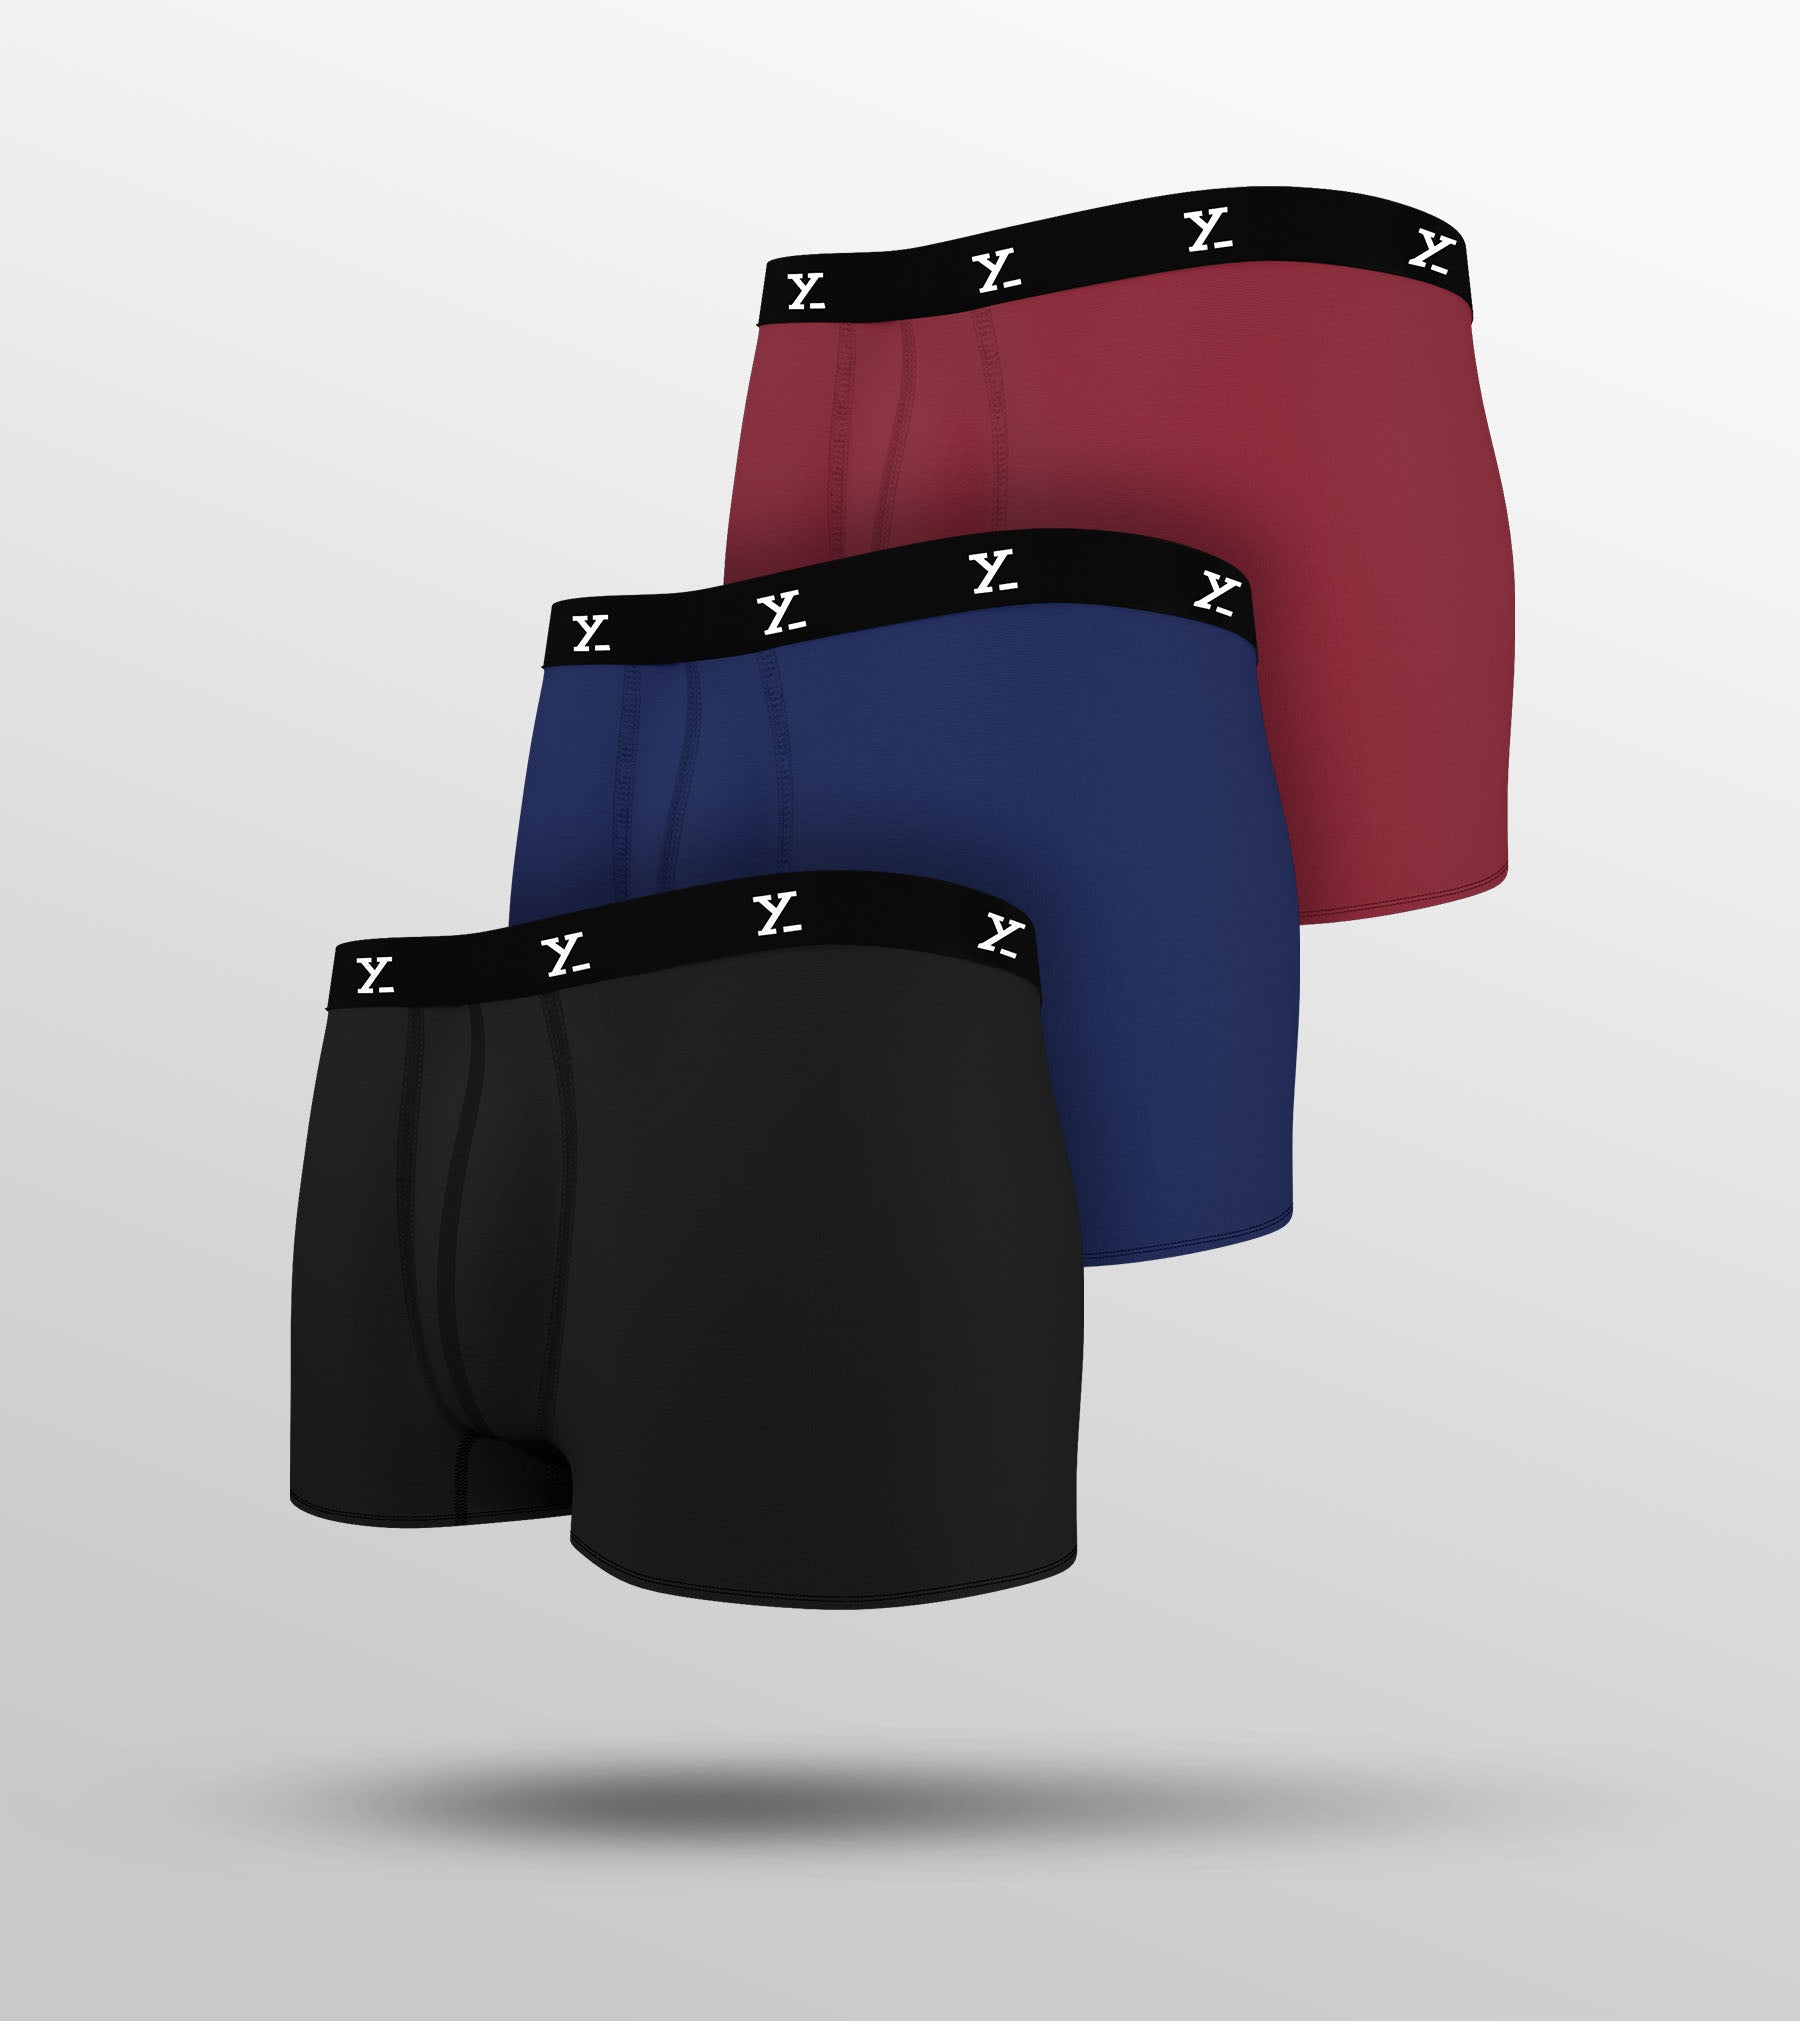 Ace Modal Trunks For Men Pack of 3 (Black, Navy Blue, Red) -  XYXX Mens Apparels